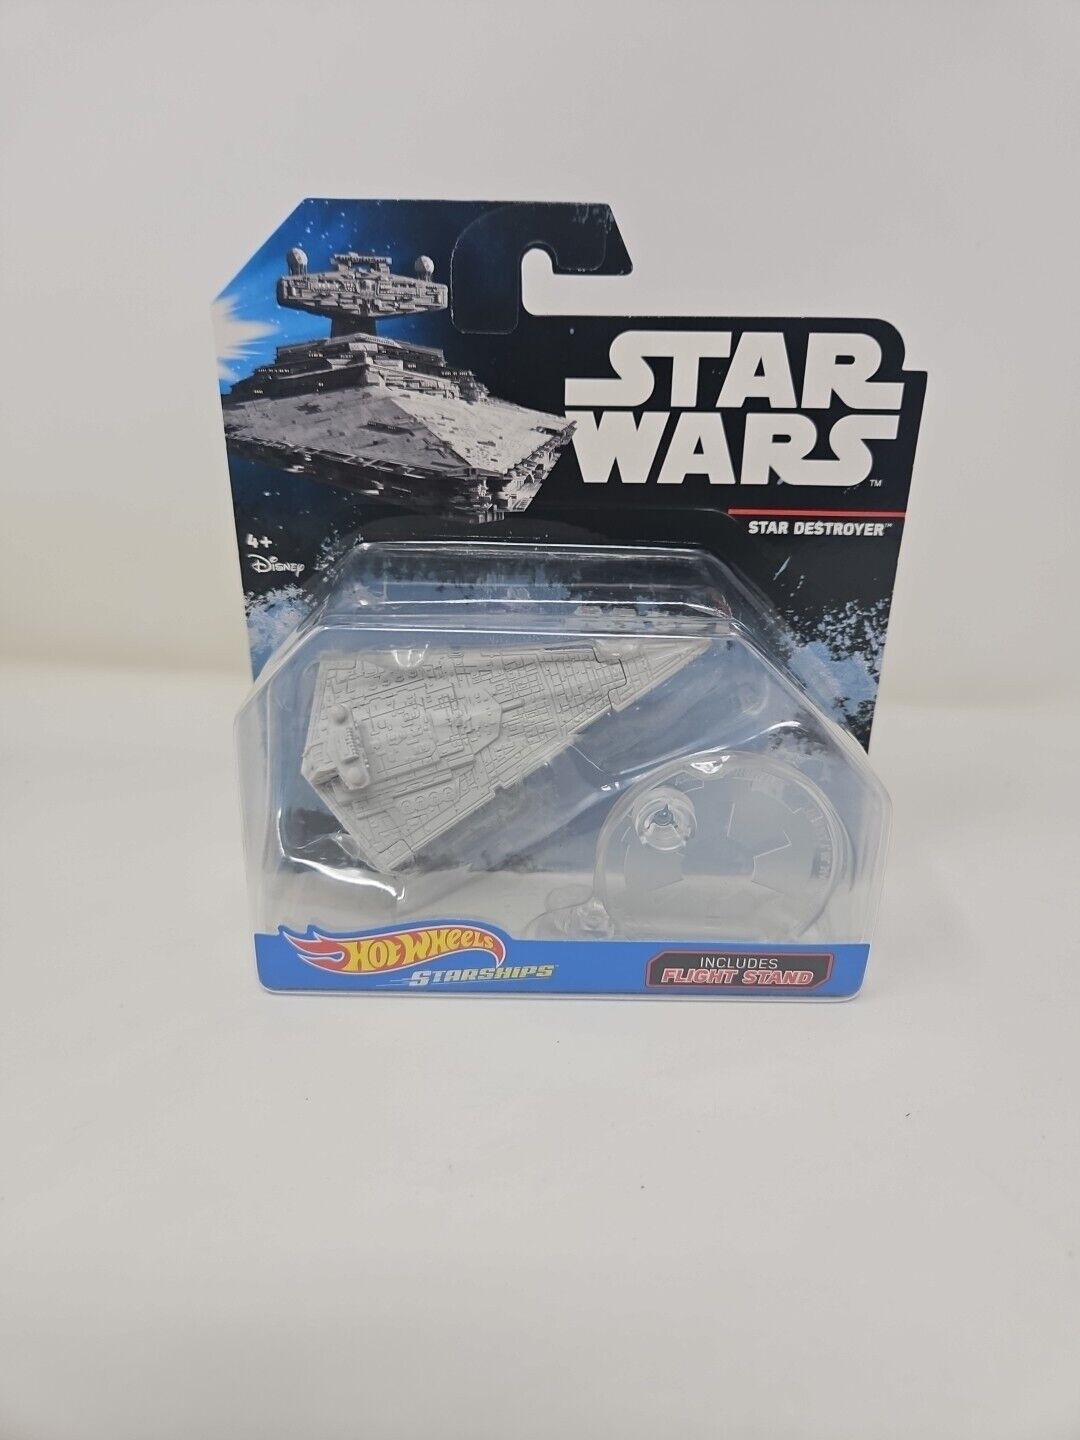 Hot Wheels Star Wars Starships Star Destroyer Brand New In Package FAST SHIPPING